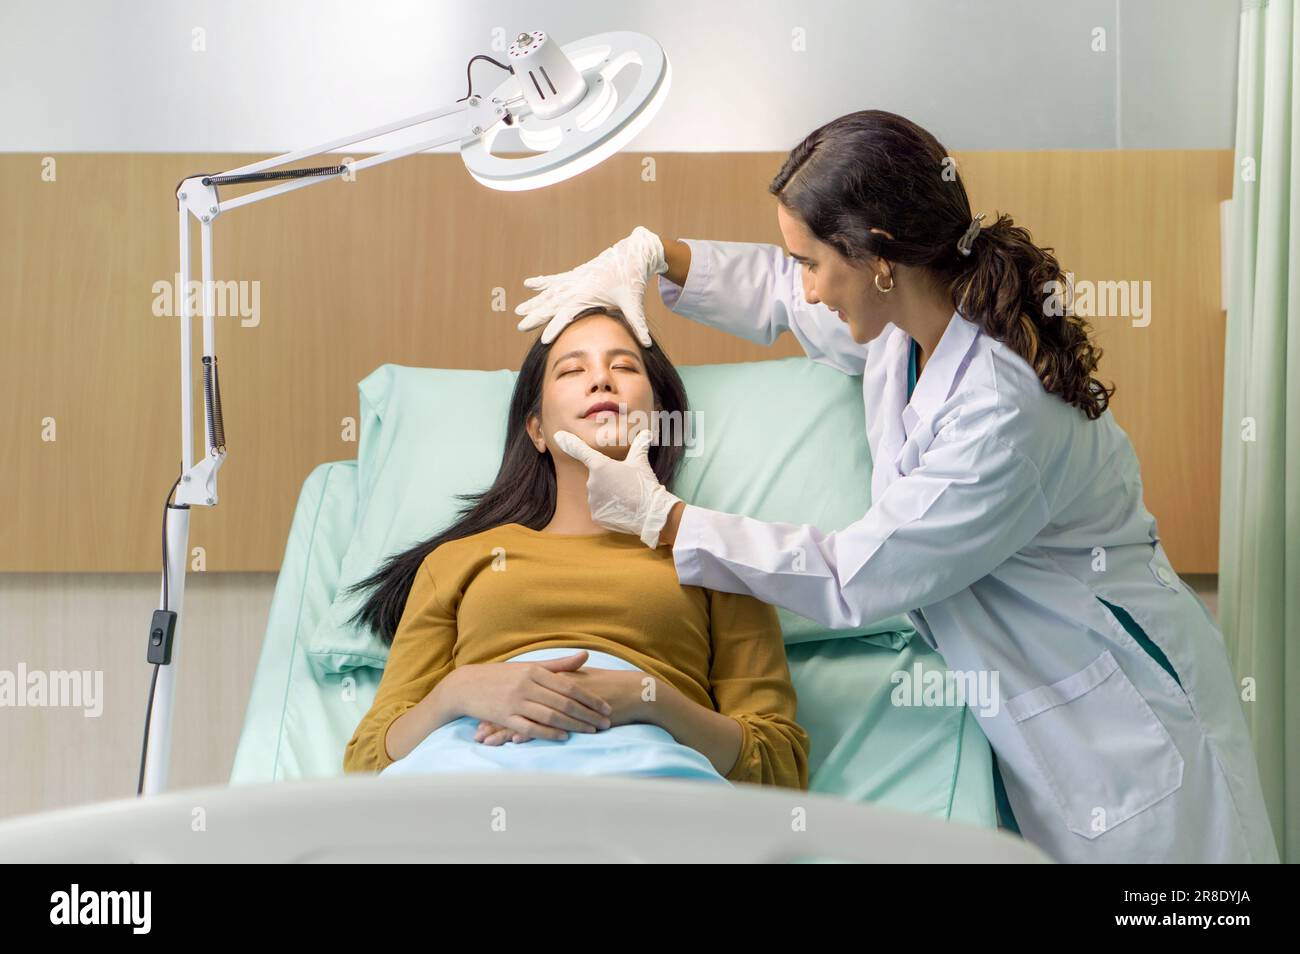 Female doctor or dermatologist  examining facial skin of young patient prepare before facelift surgery. Atmosphere at cosmetic surgery department in h Stock Photo